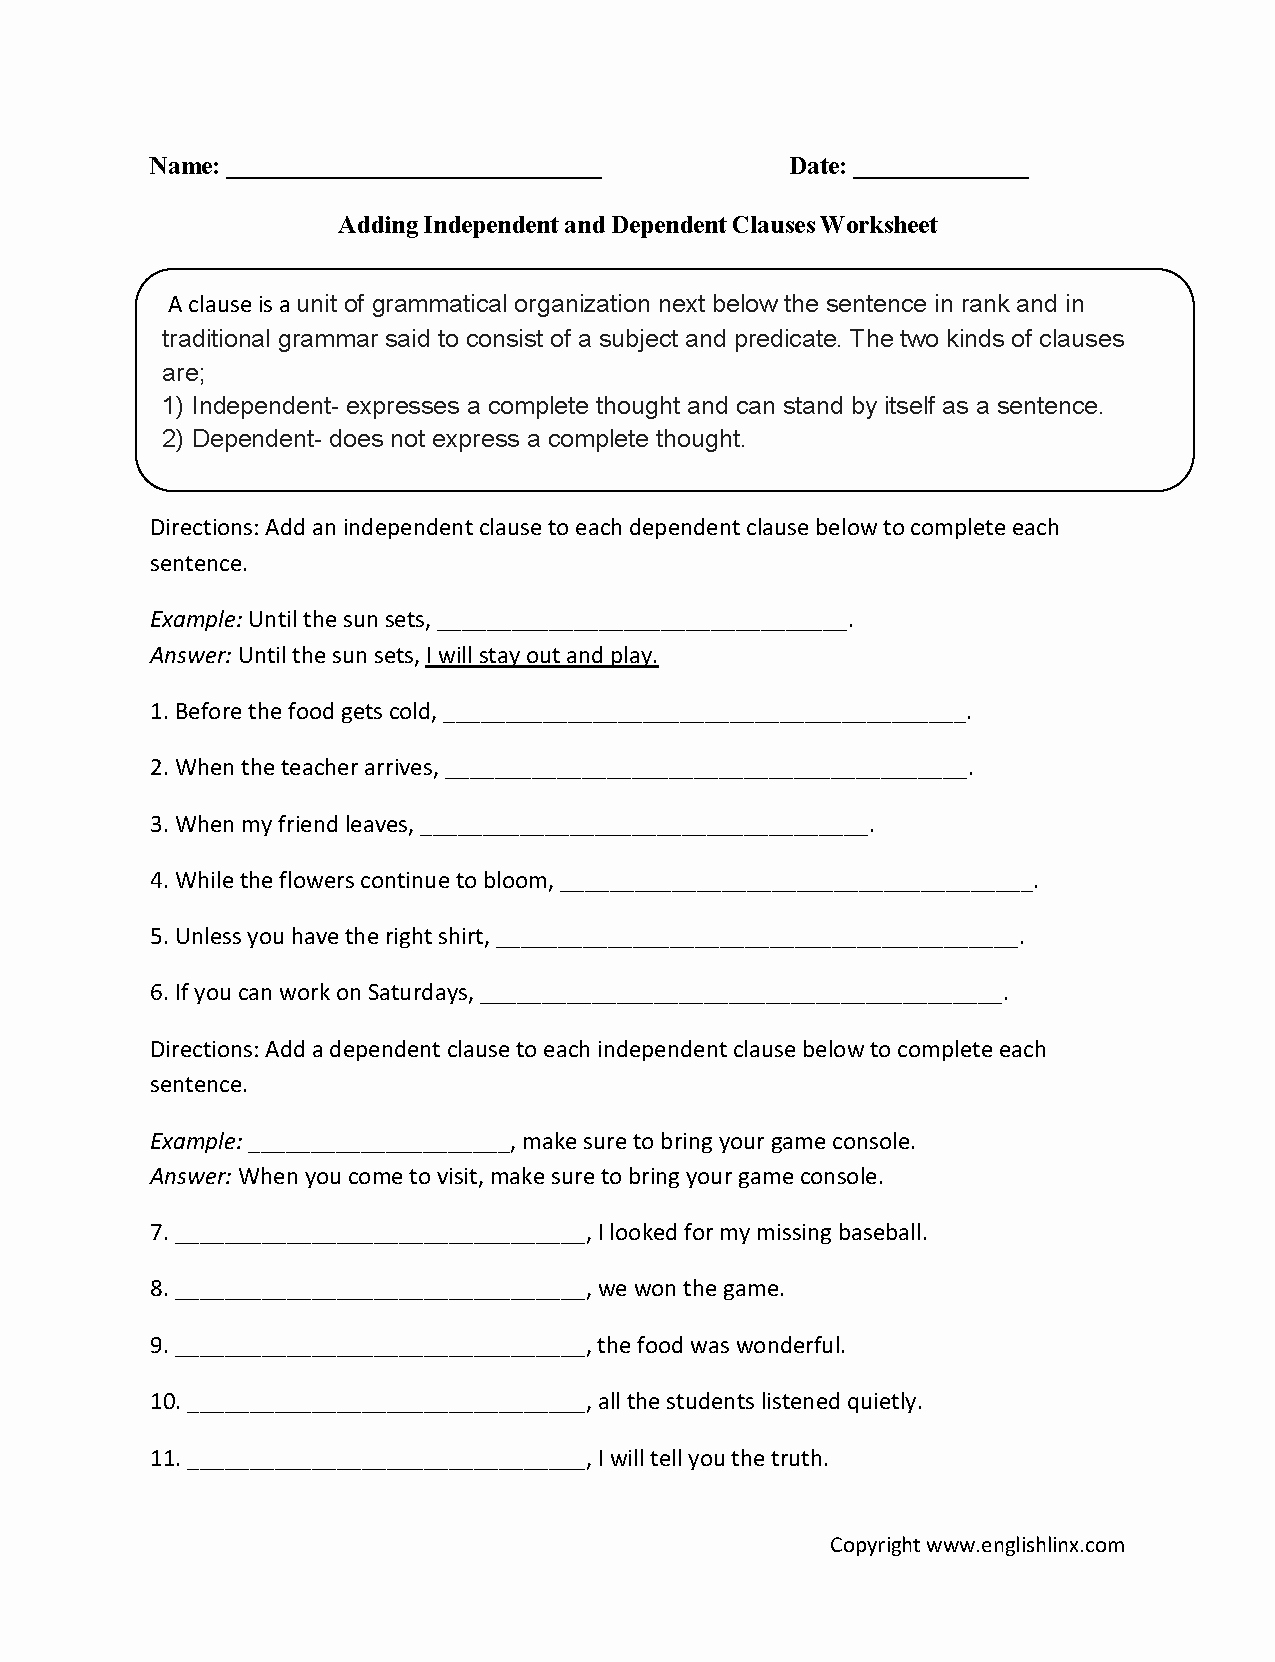 Independent and Dependent Clauses Worksheet Inspirational Pin On Vocabulary Activities